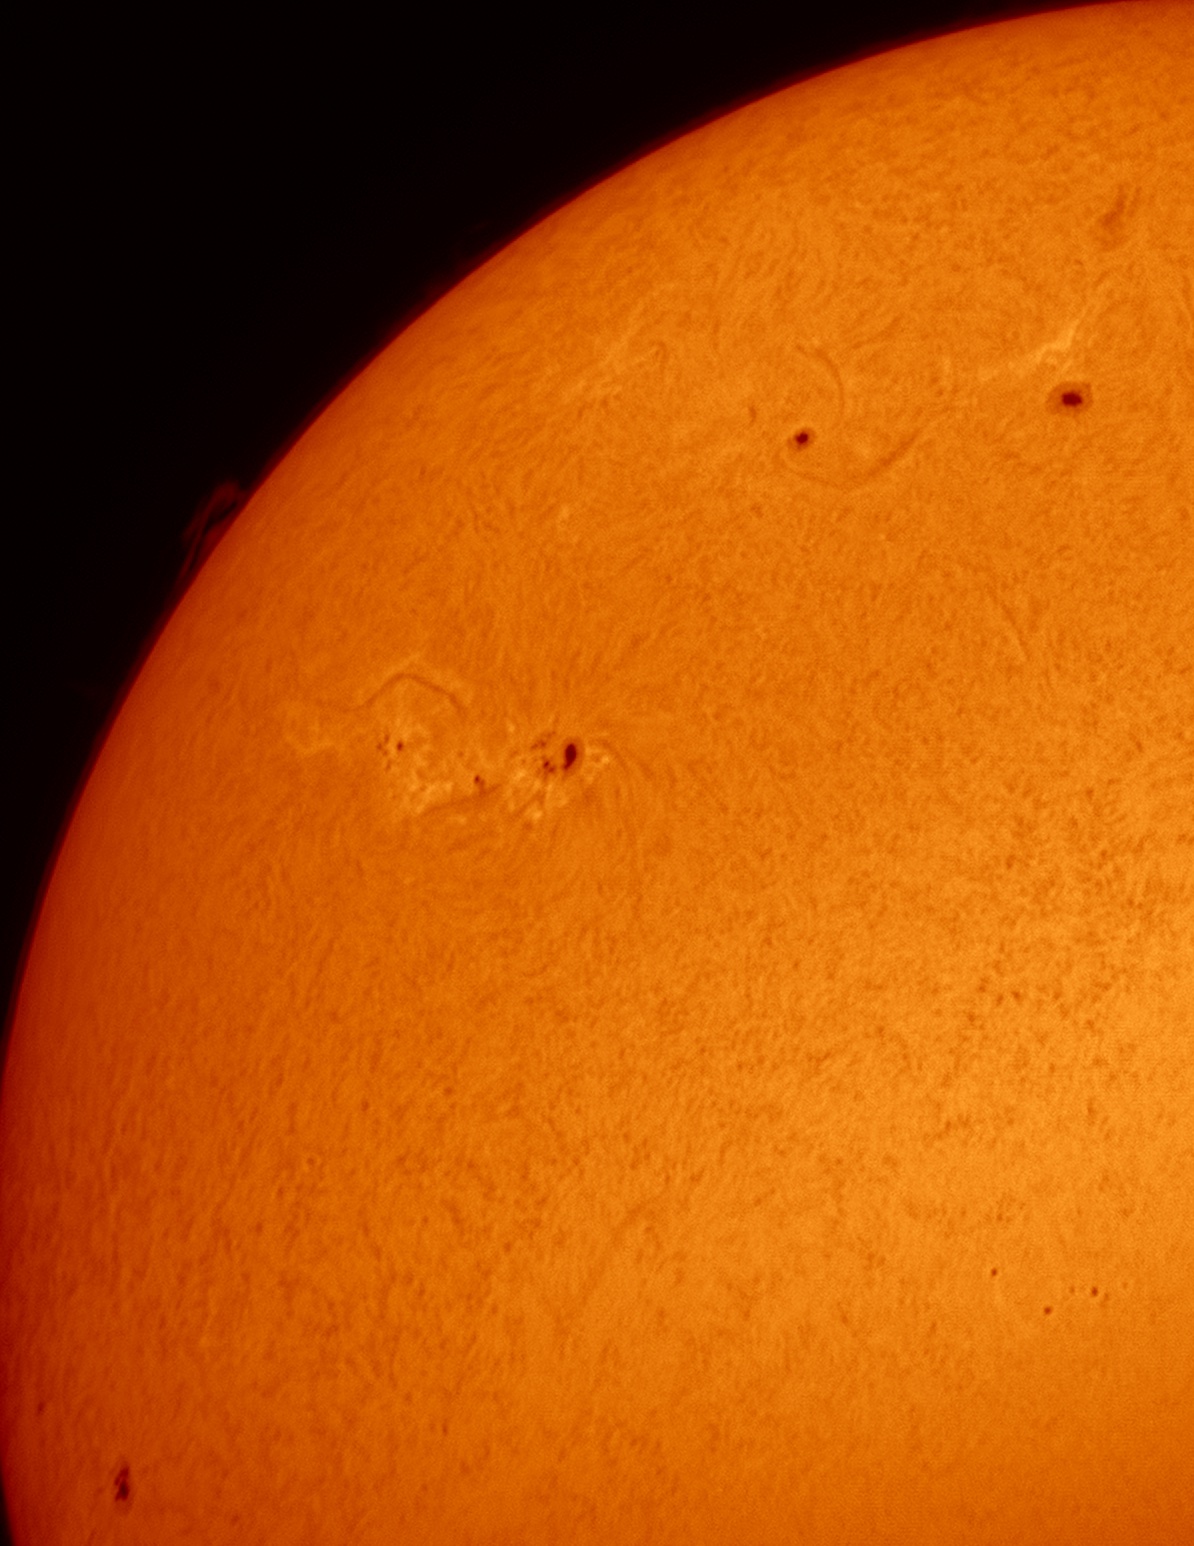 Sunspots, filaments, and plages are seen through a Coronado PST with a ZWO ASI290MM camera on March 4, 2023, in this artificially colored monochrome image. Credit: Molly Wakeling